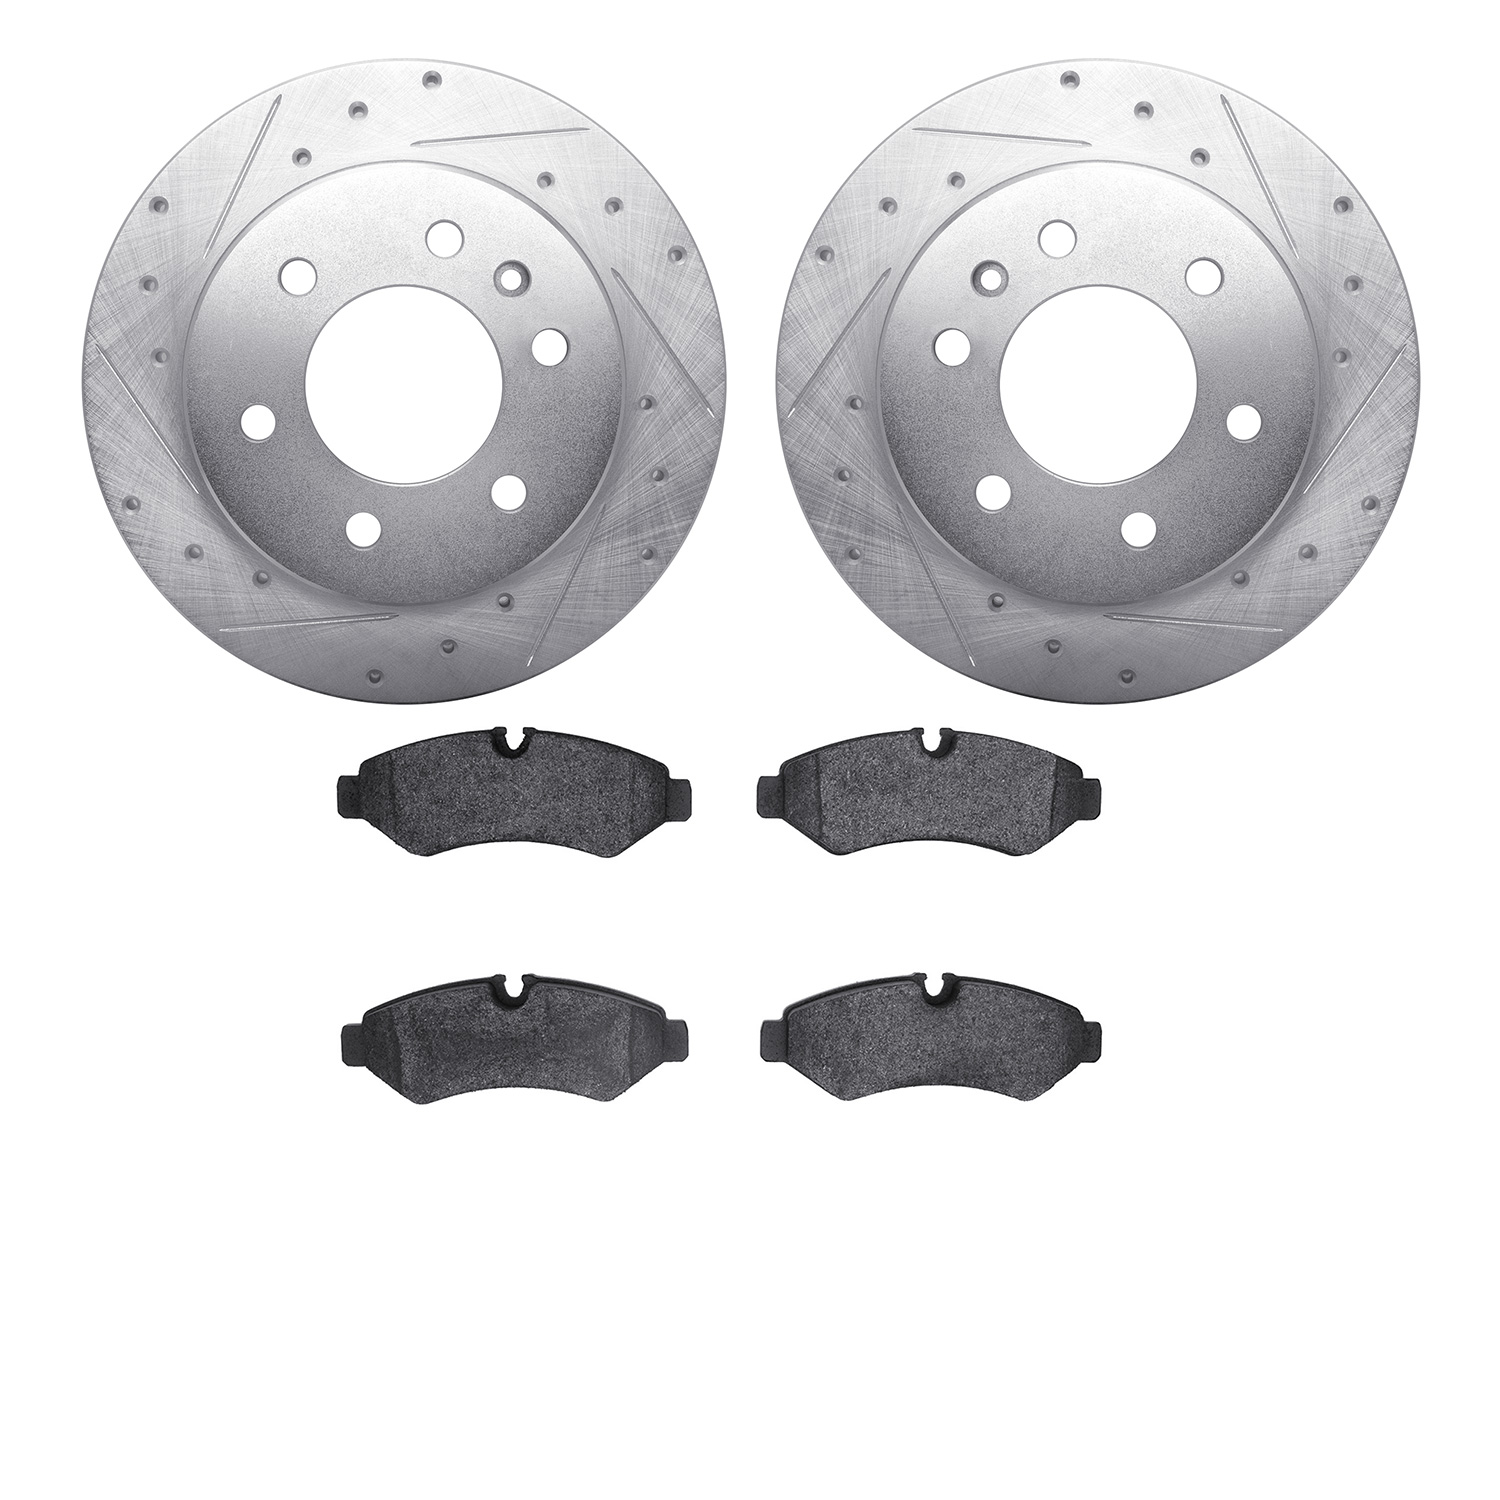 7502-63584 Drilled/Slotted Brake Rotors w/5000 Advanced Brake Pads Kit [Silver], Fits Select Multiple Makes/Models, Position: Re